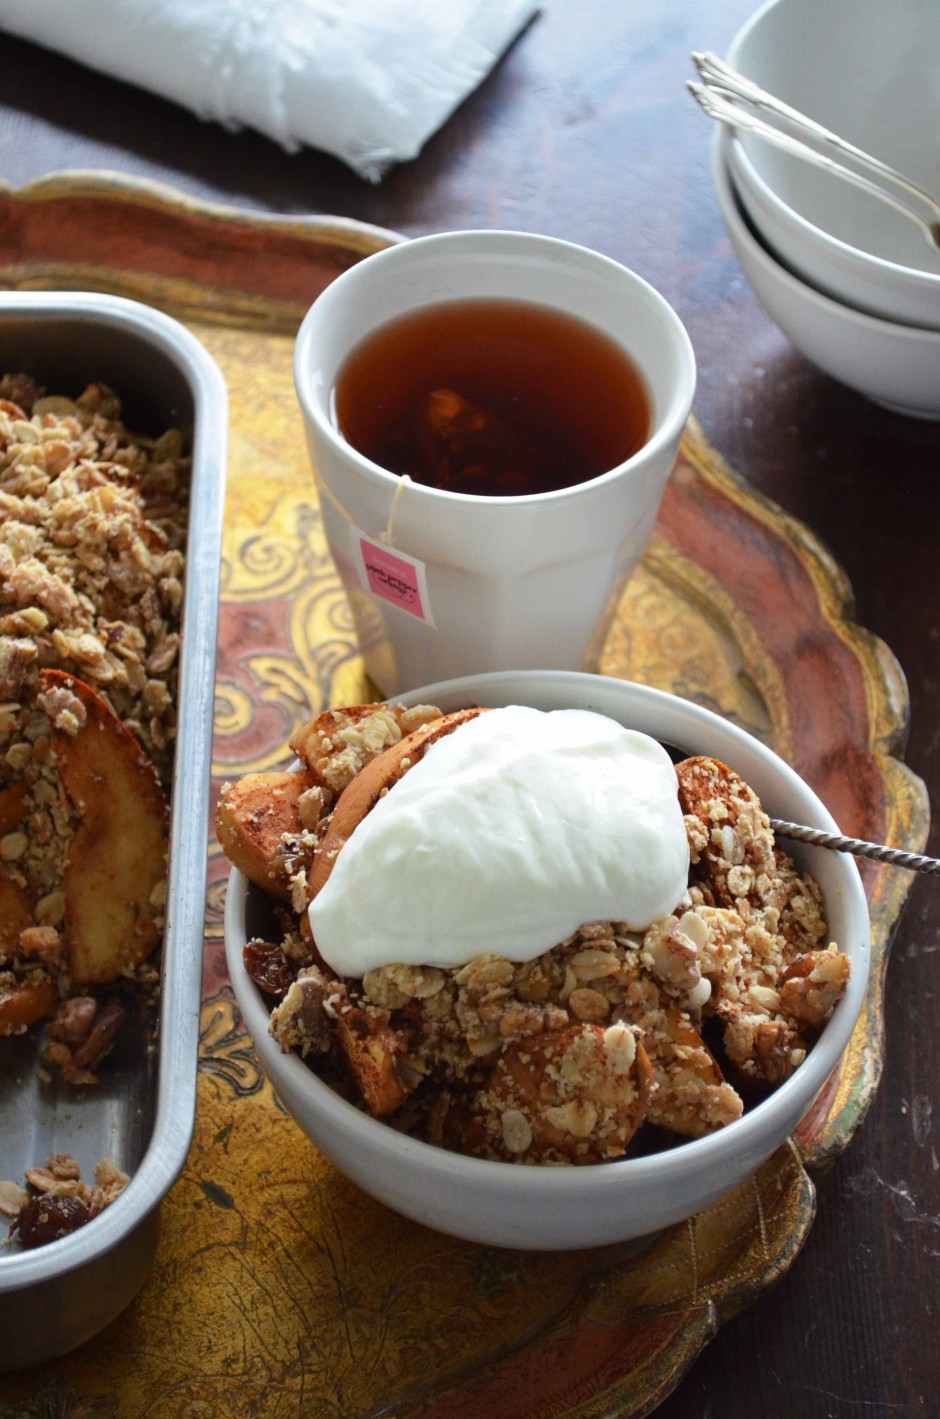 A delicious Baked Apple Crisp recipe from That Healthy Kitchen. This version is gluten free and vegan, and naturally sweetened. Find the recipe on www.thathealthykitchen.com/baked-apple-crisp